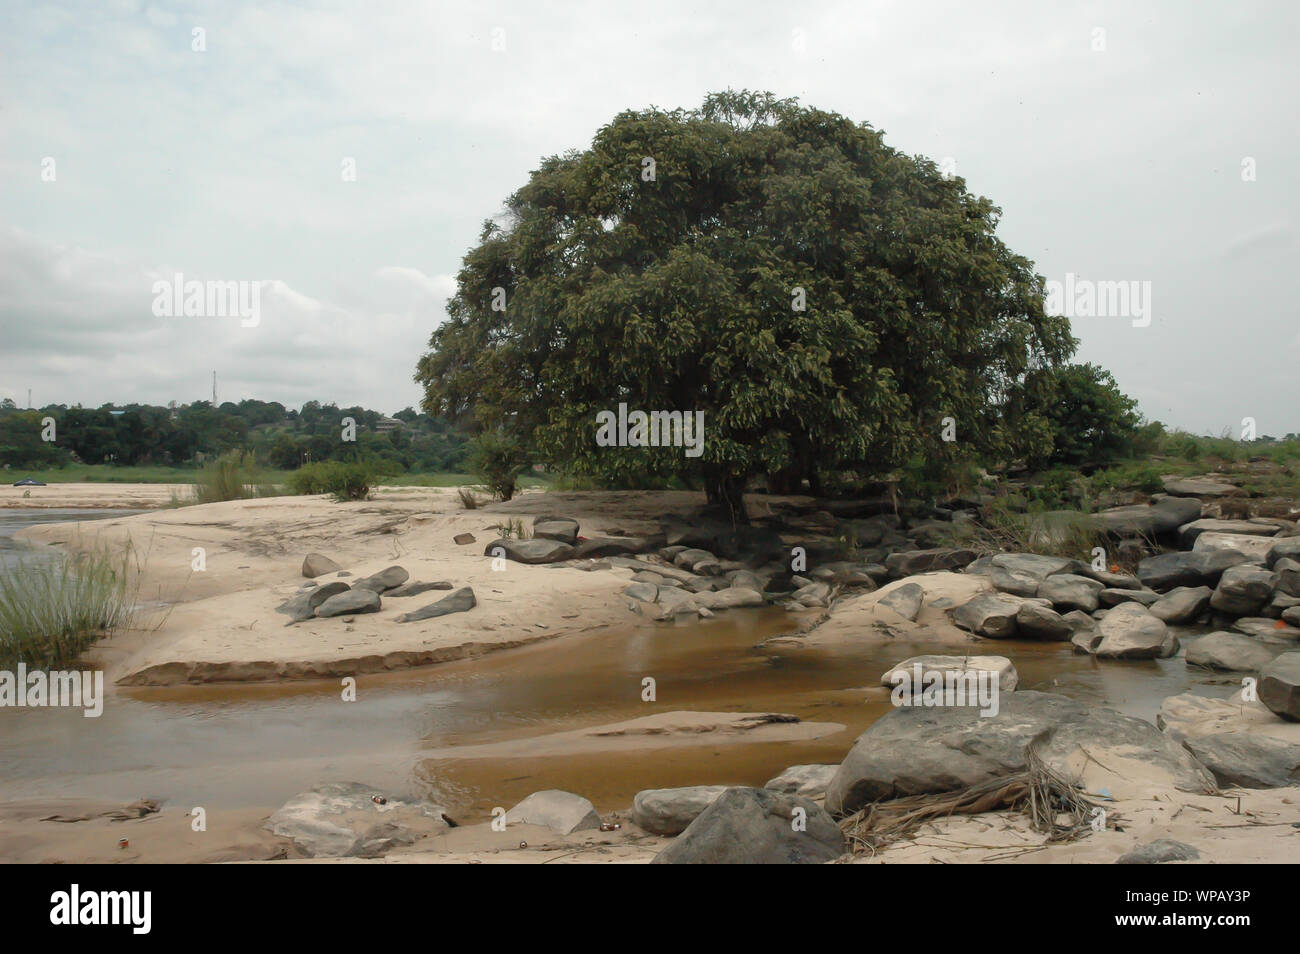 African tree between sand and rocks surrounded by side arm of th congo river Stock Photo